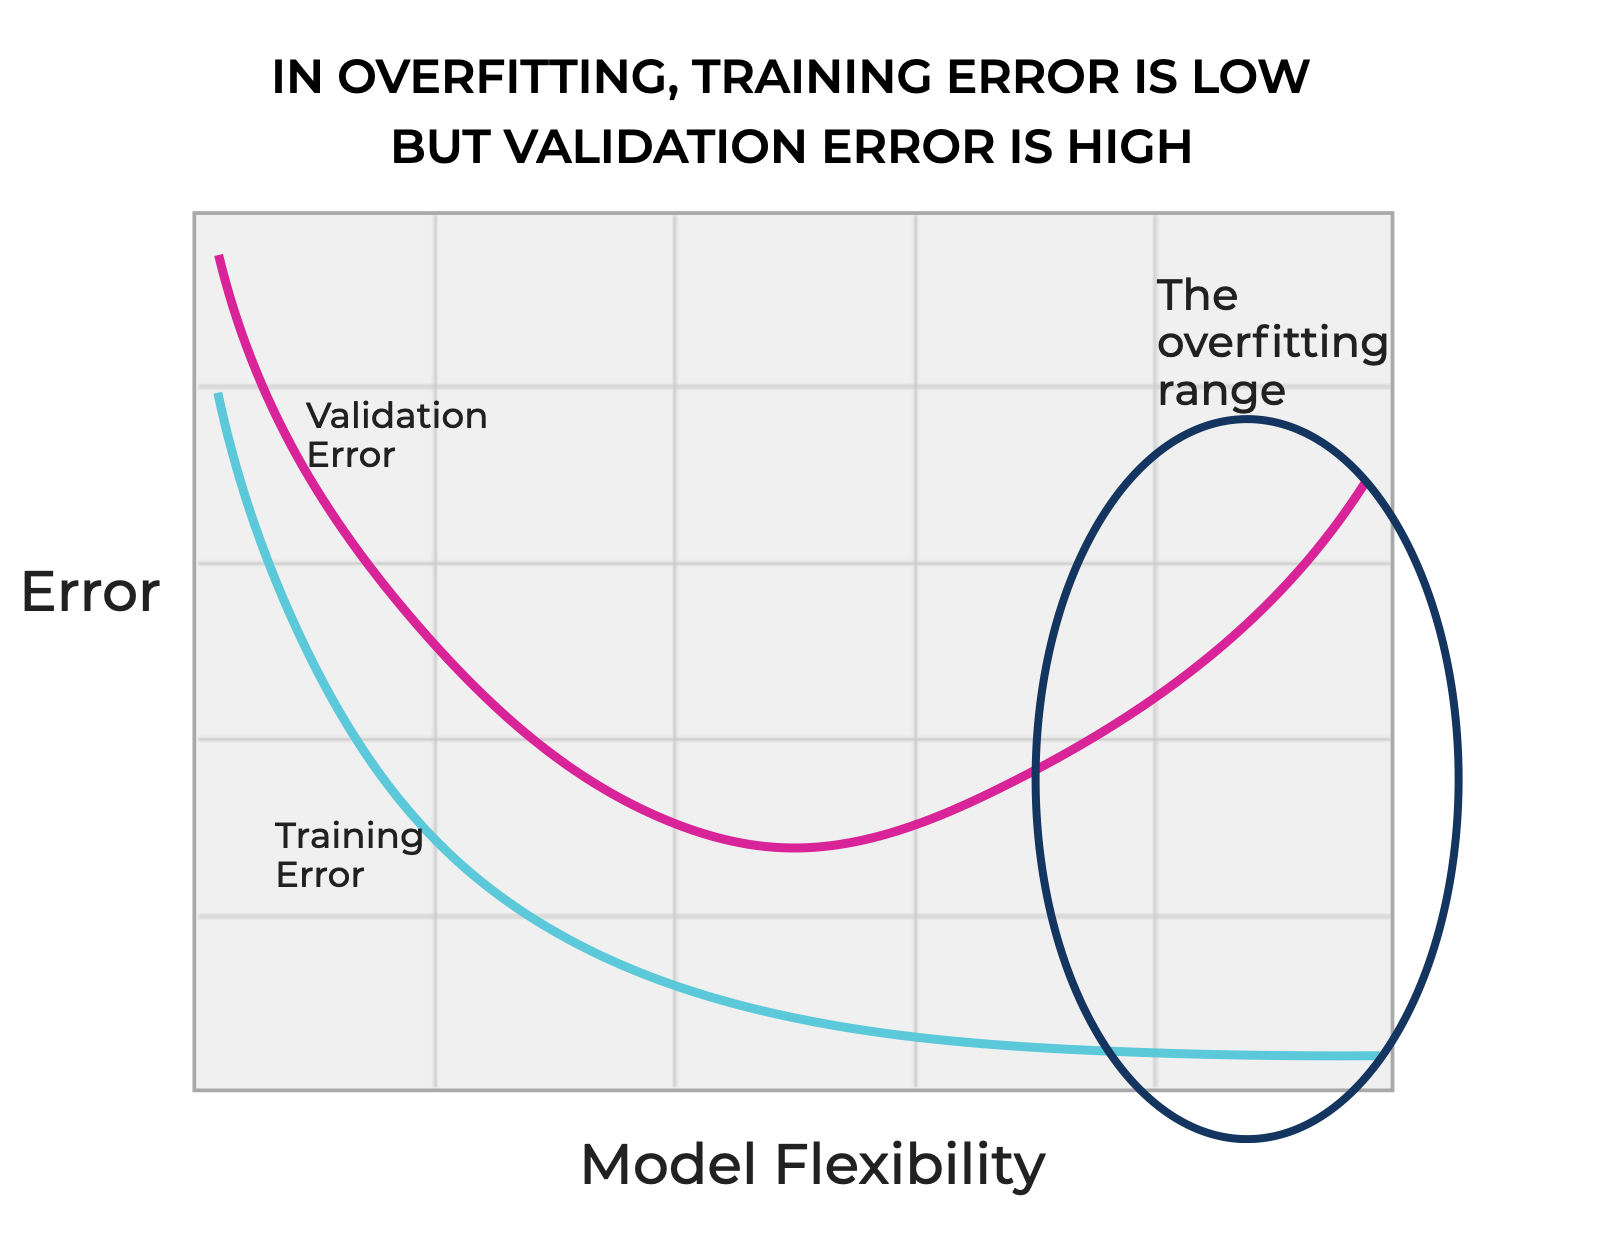 An image that shows the overfitting range, in the context of how model flexibility relates to training and validation error.